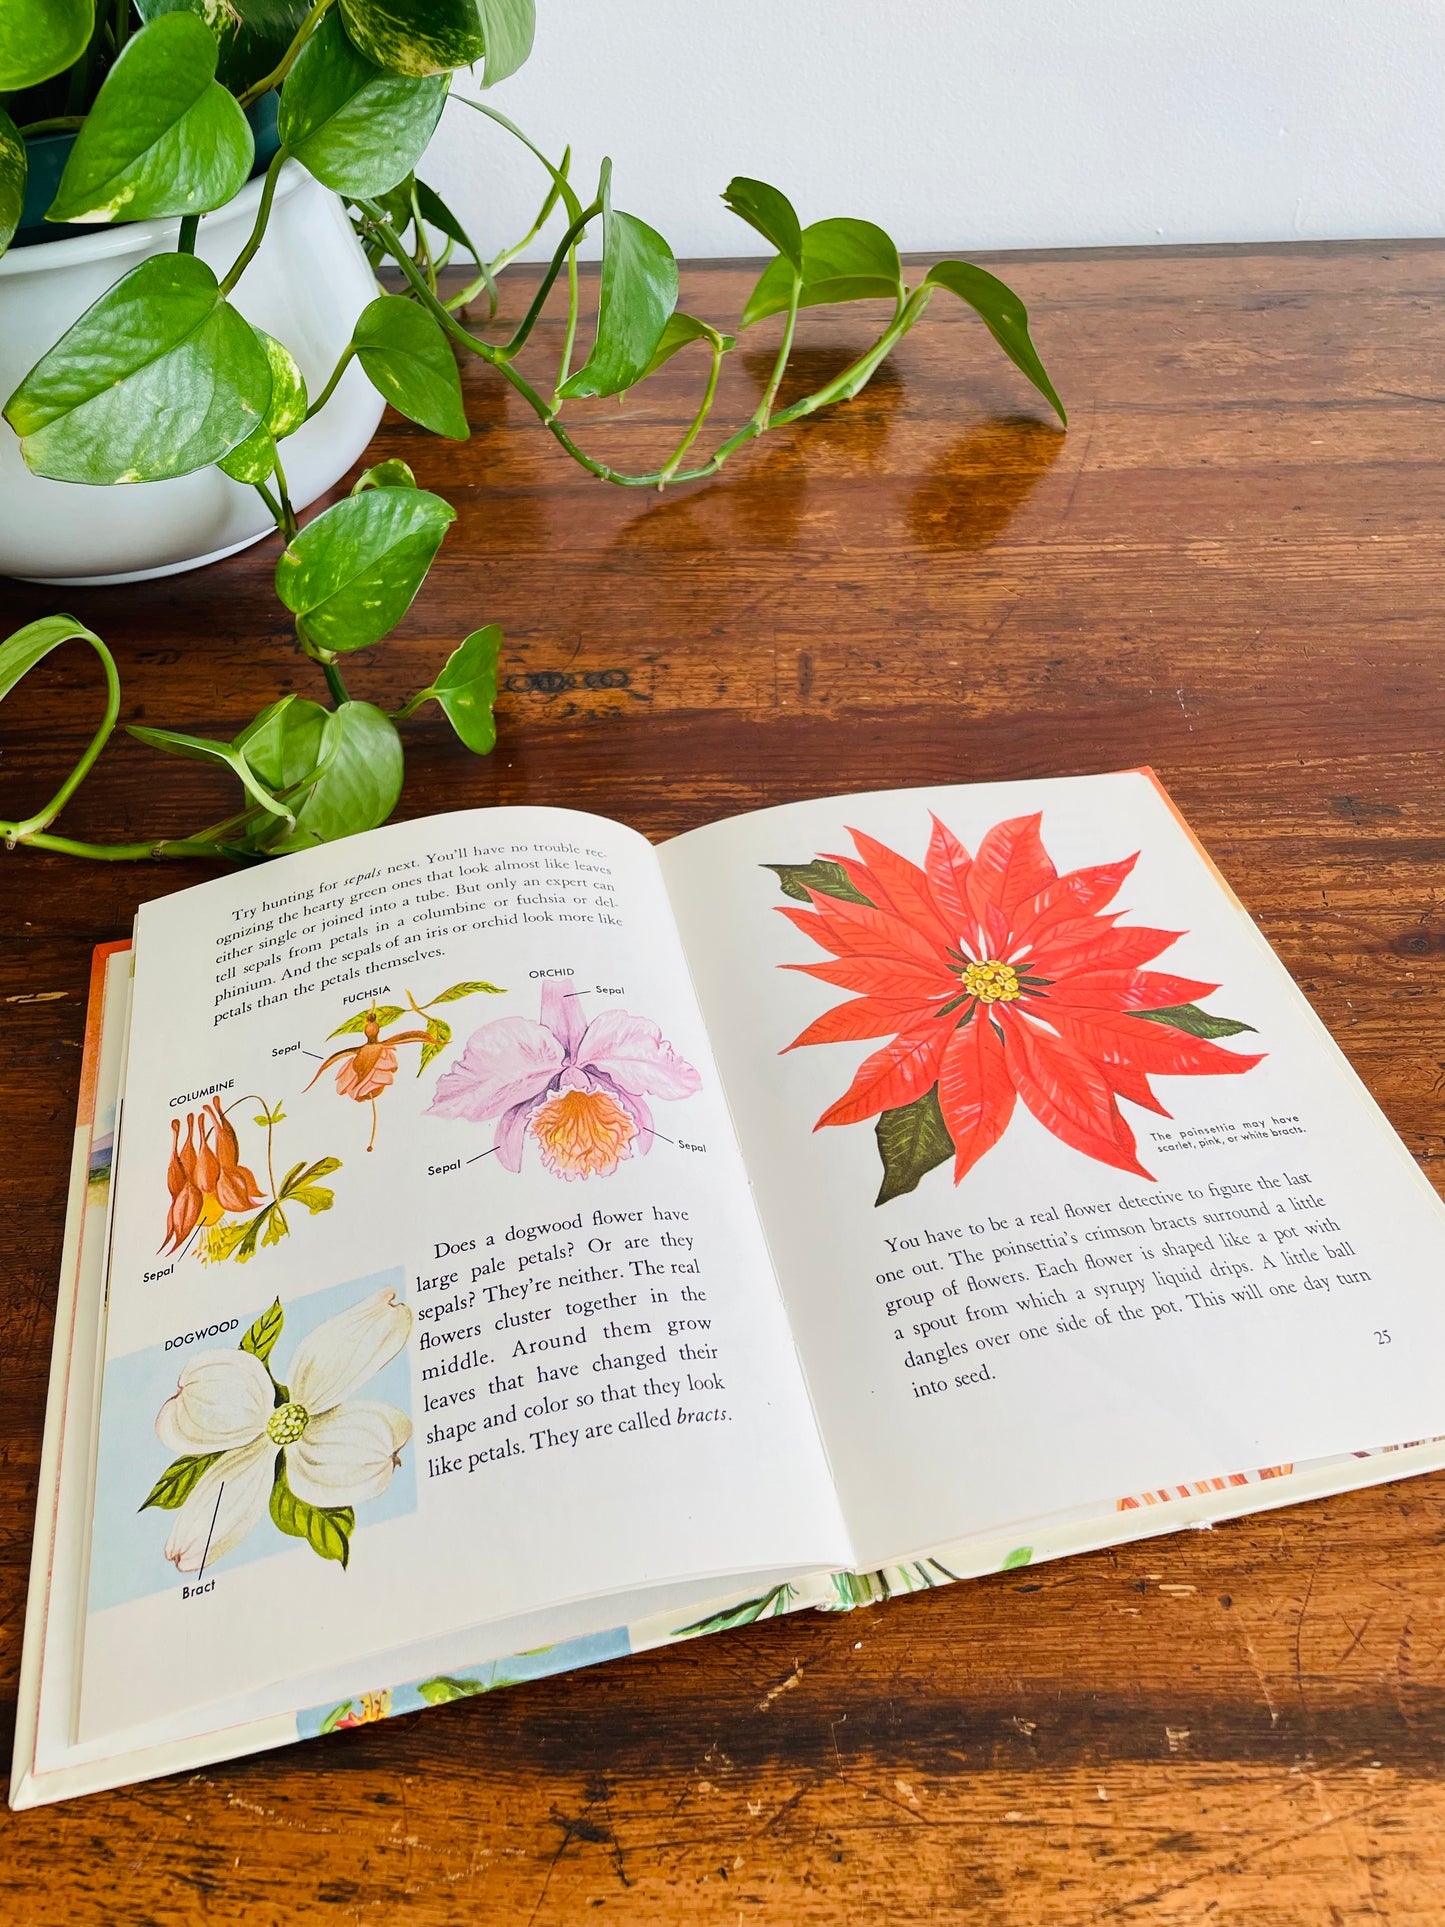 Flowers and What They Are by Mary Elting - A Whitman Learn About Book - Hardcover (1961)